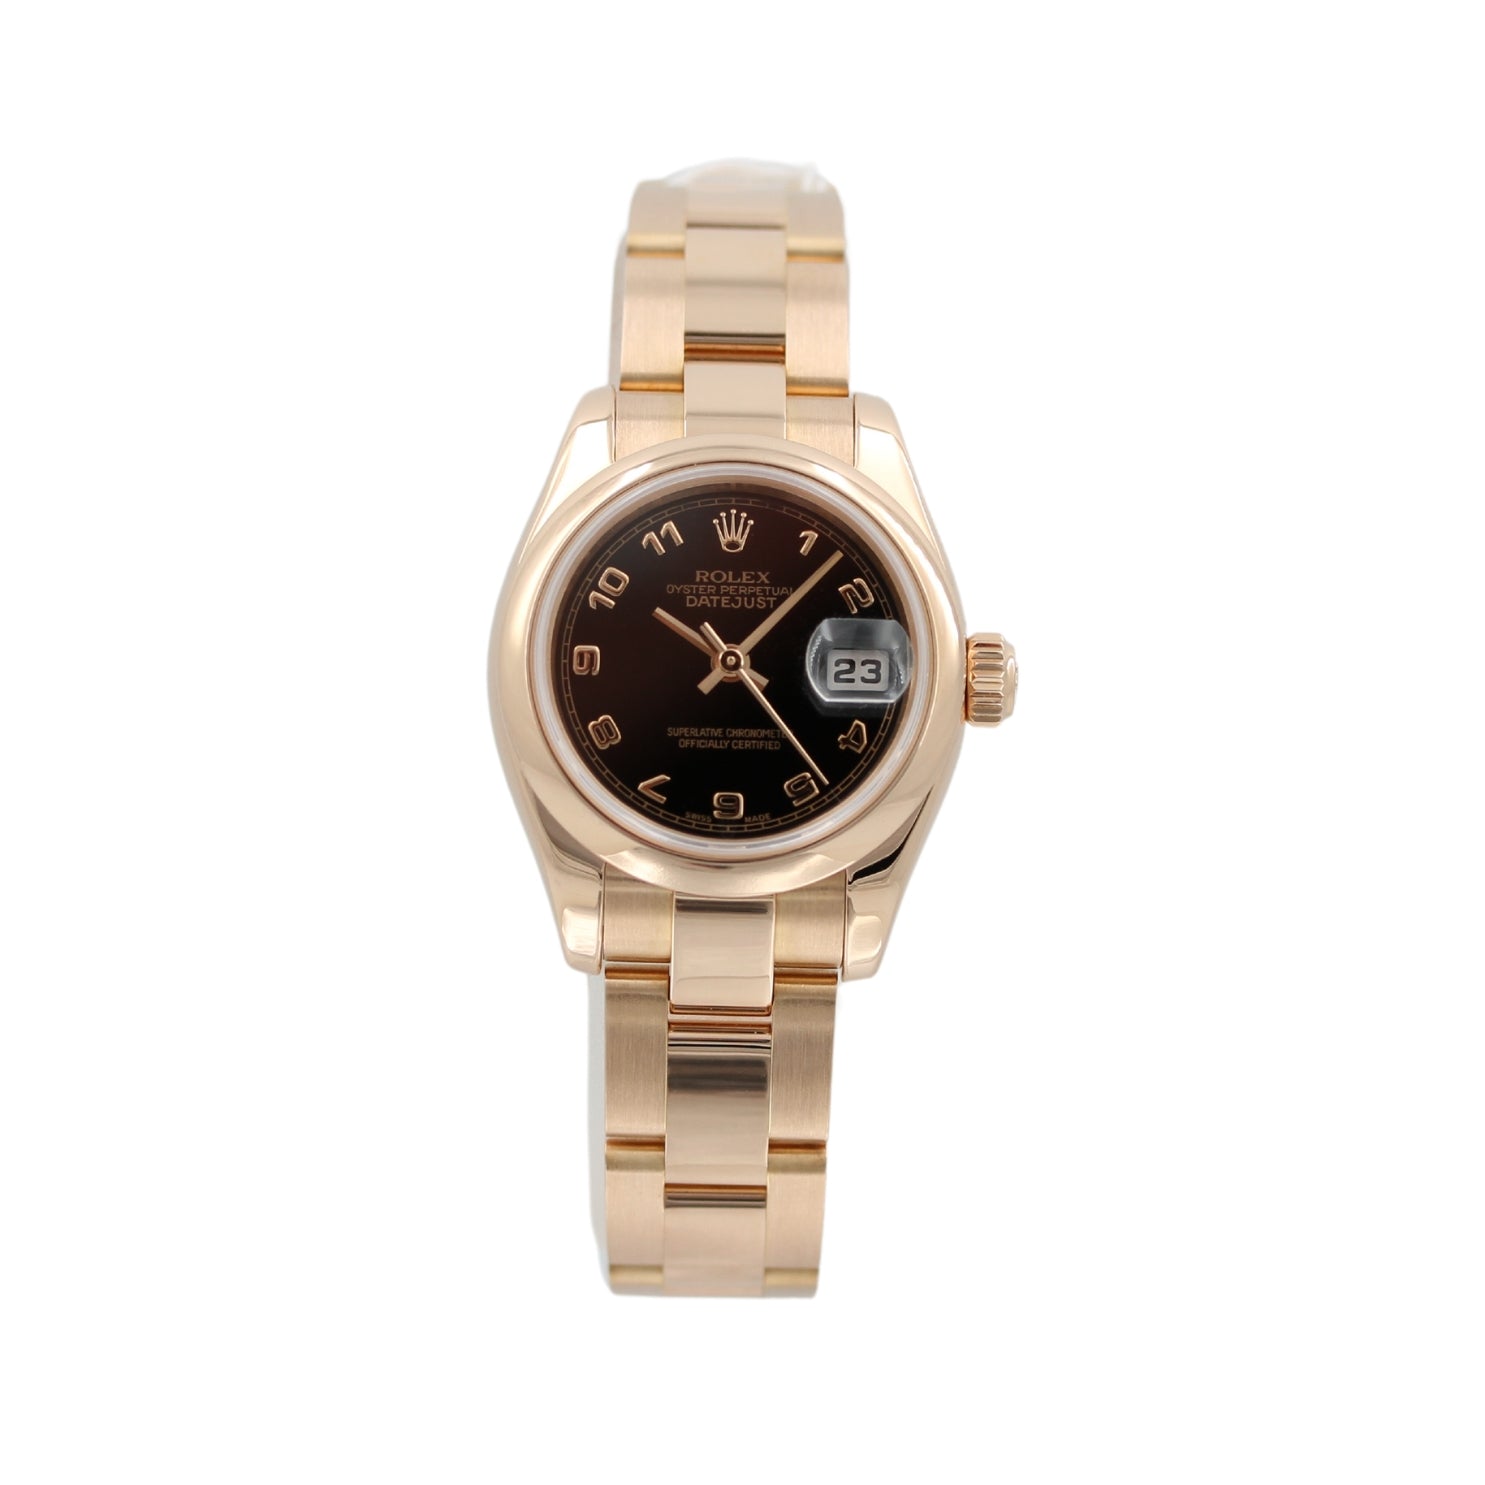 Rolex Lady Datejust 26, Everose Gold, Oyster, Ref. 179165, B+P - LUXUHRIA